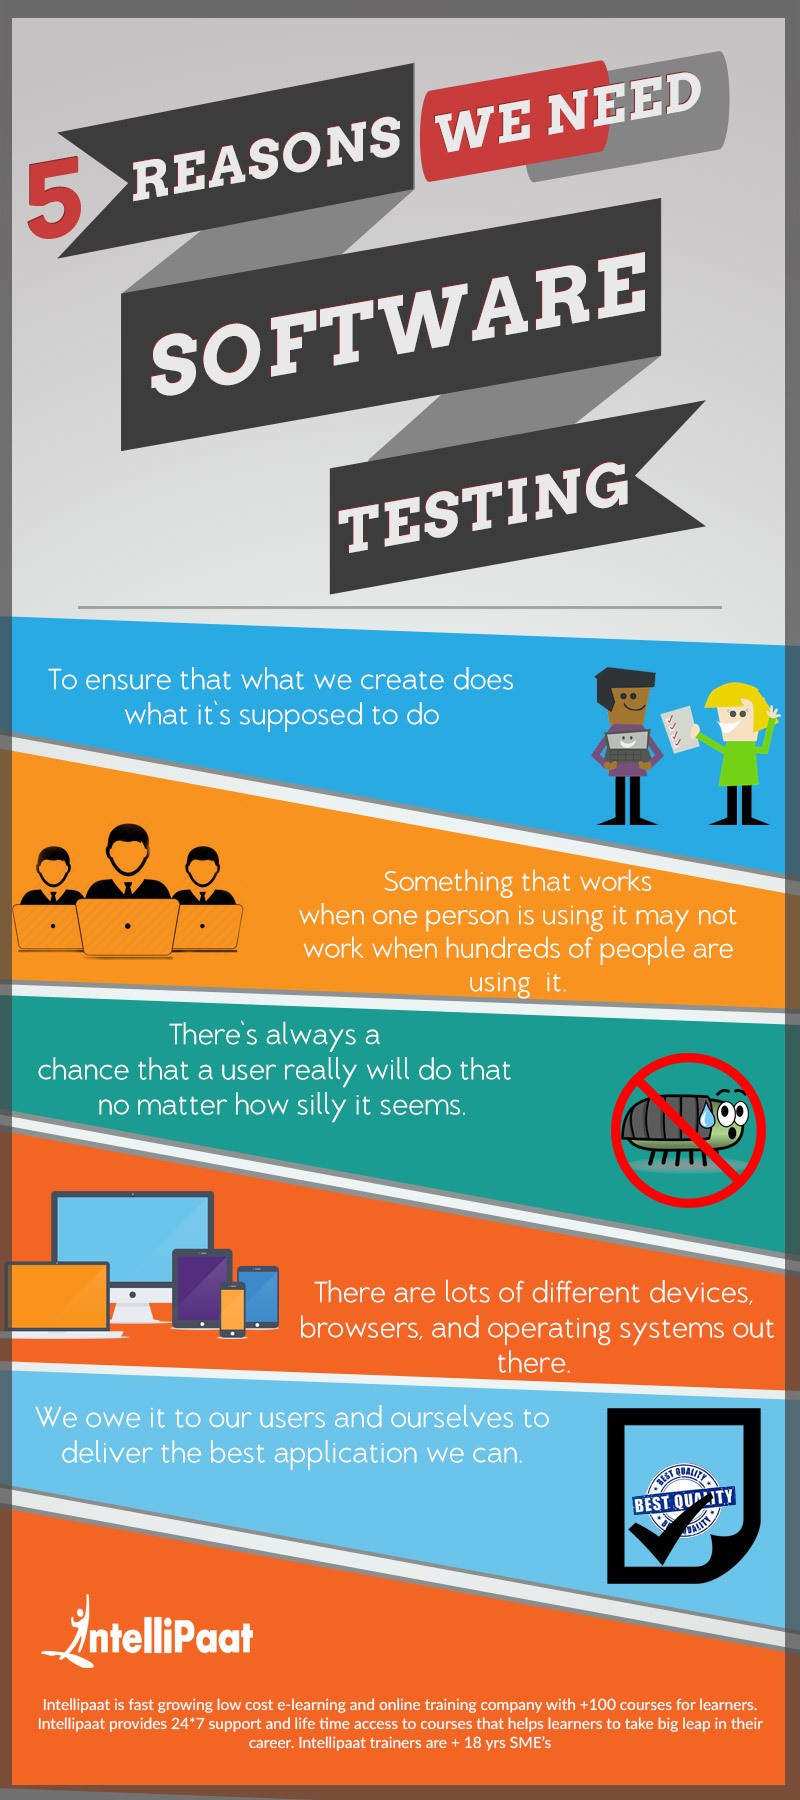 5 Reasons We Need for Software Testing Infographic